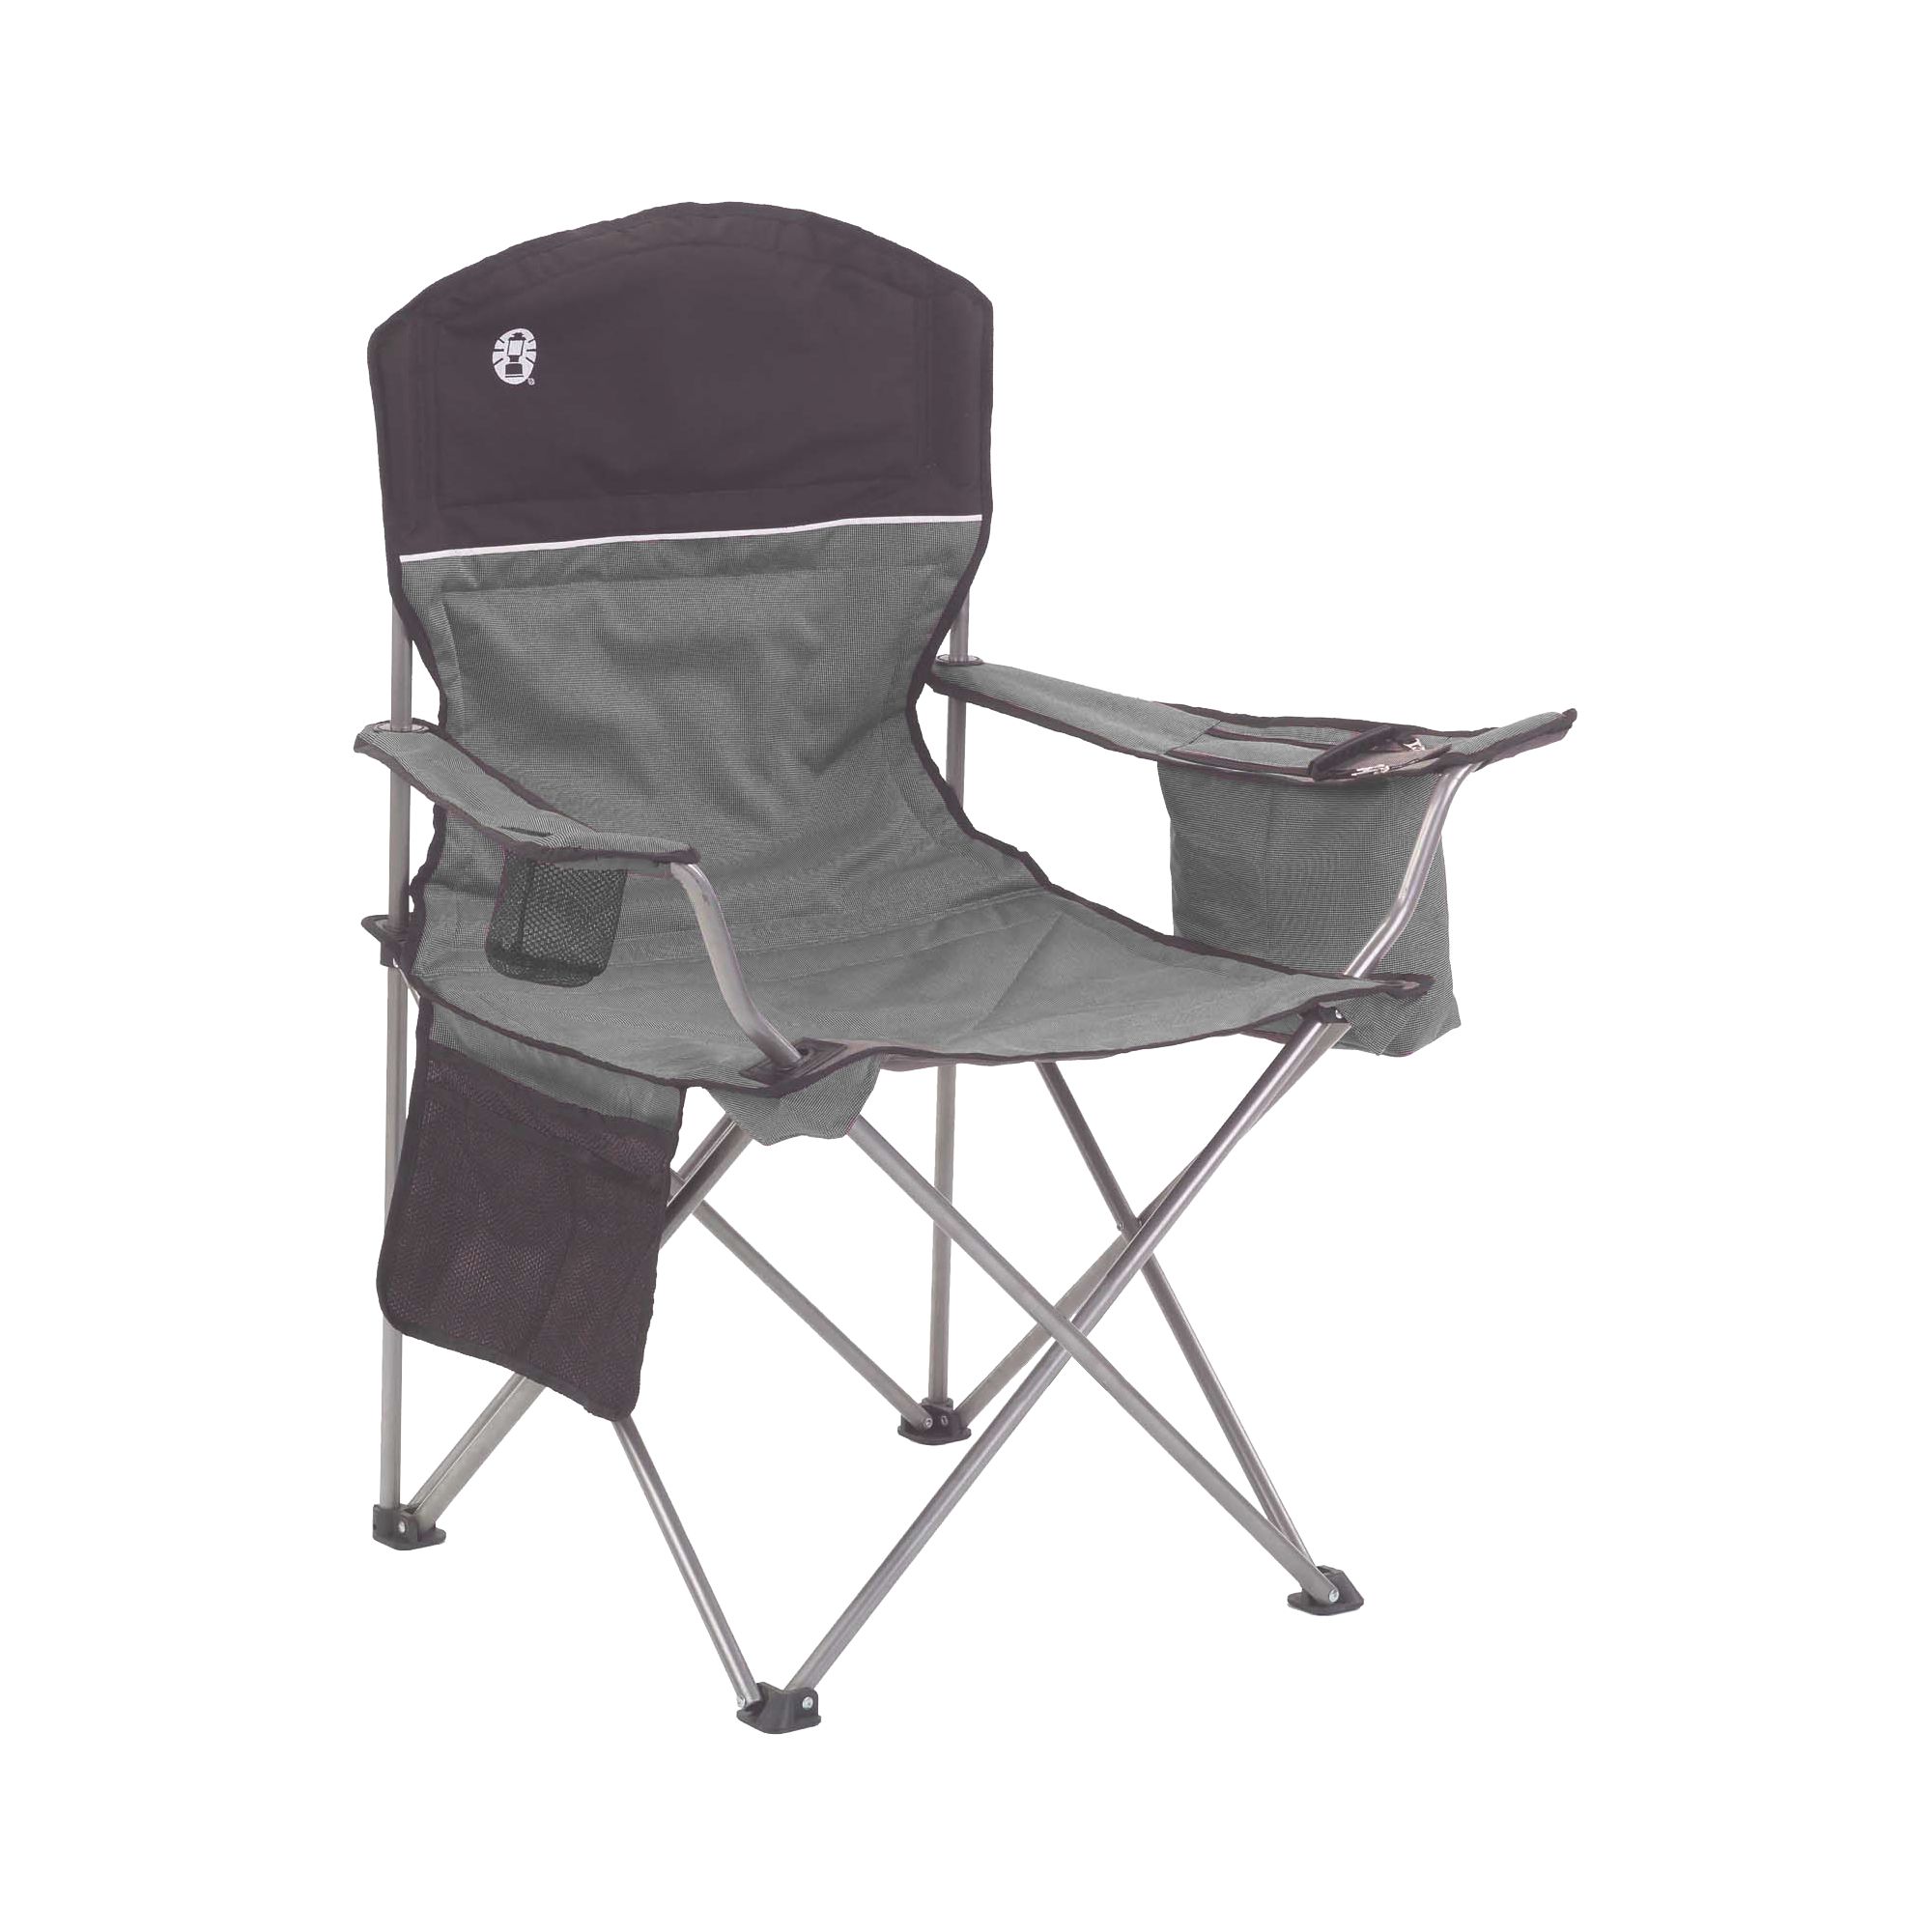 Coleman Oversized Quad Chair With Cooler 2000032010 With Free Sh Campsaver